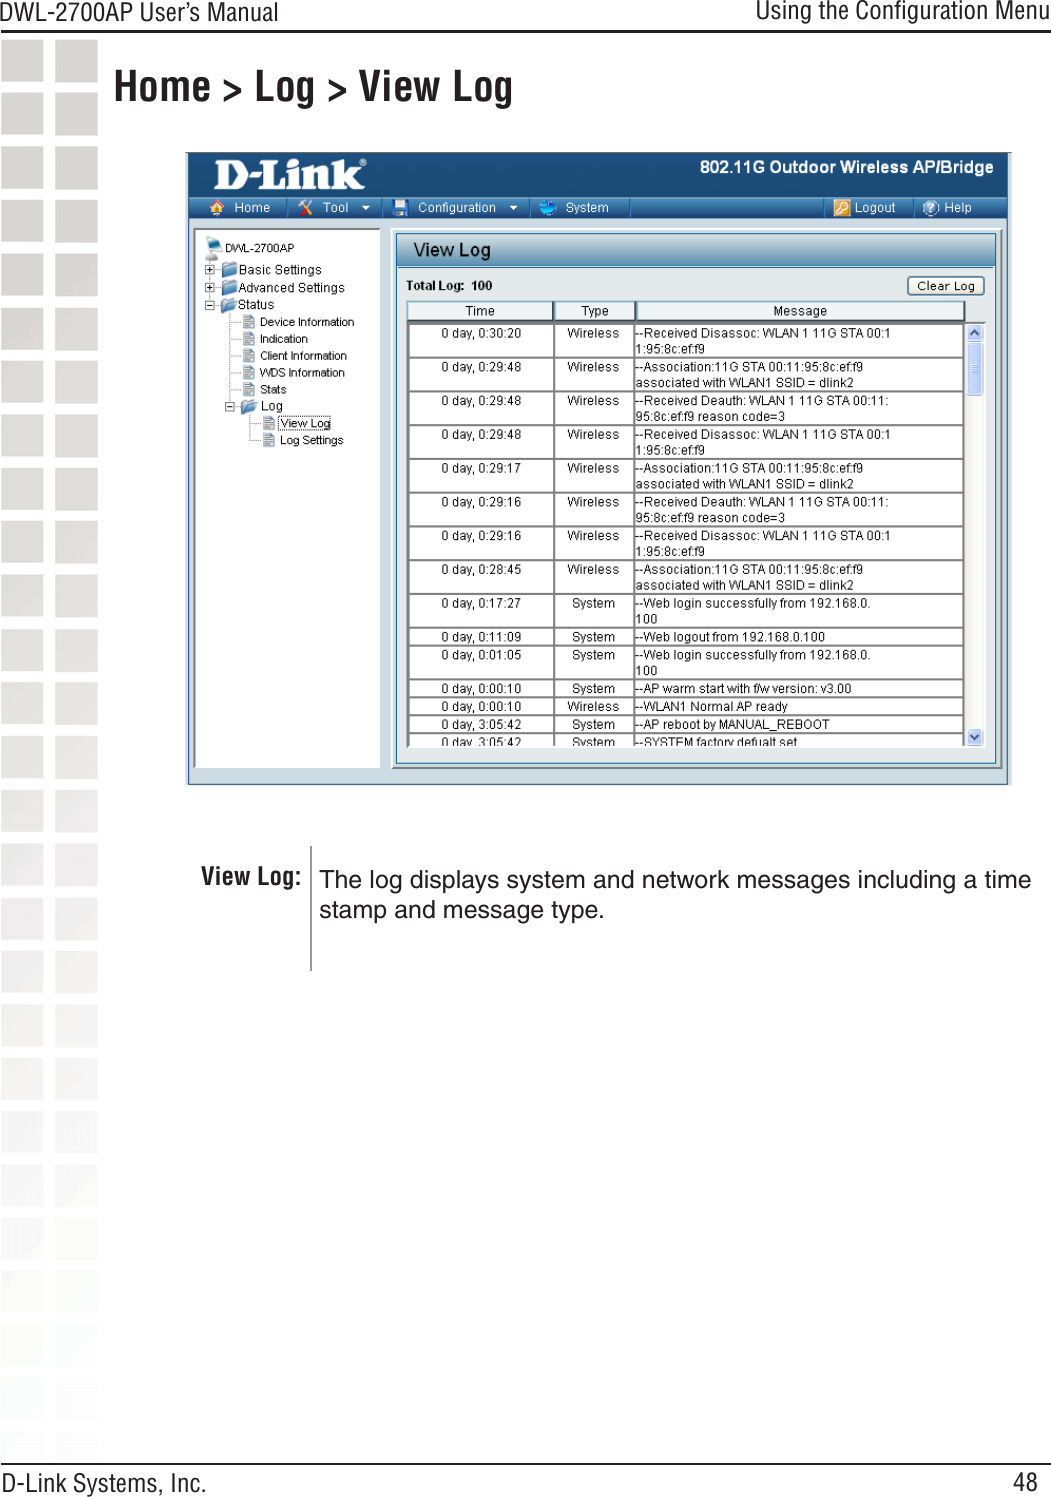 48DWL-2700AP User’s Manual D-Link Systems, Inc.Using the Conﬁguration MenuHome &gt; Log &gt; View LogView Log: The log displays system and network messages including a time stamp and message type.